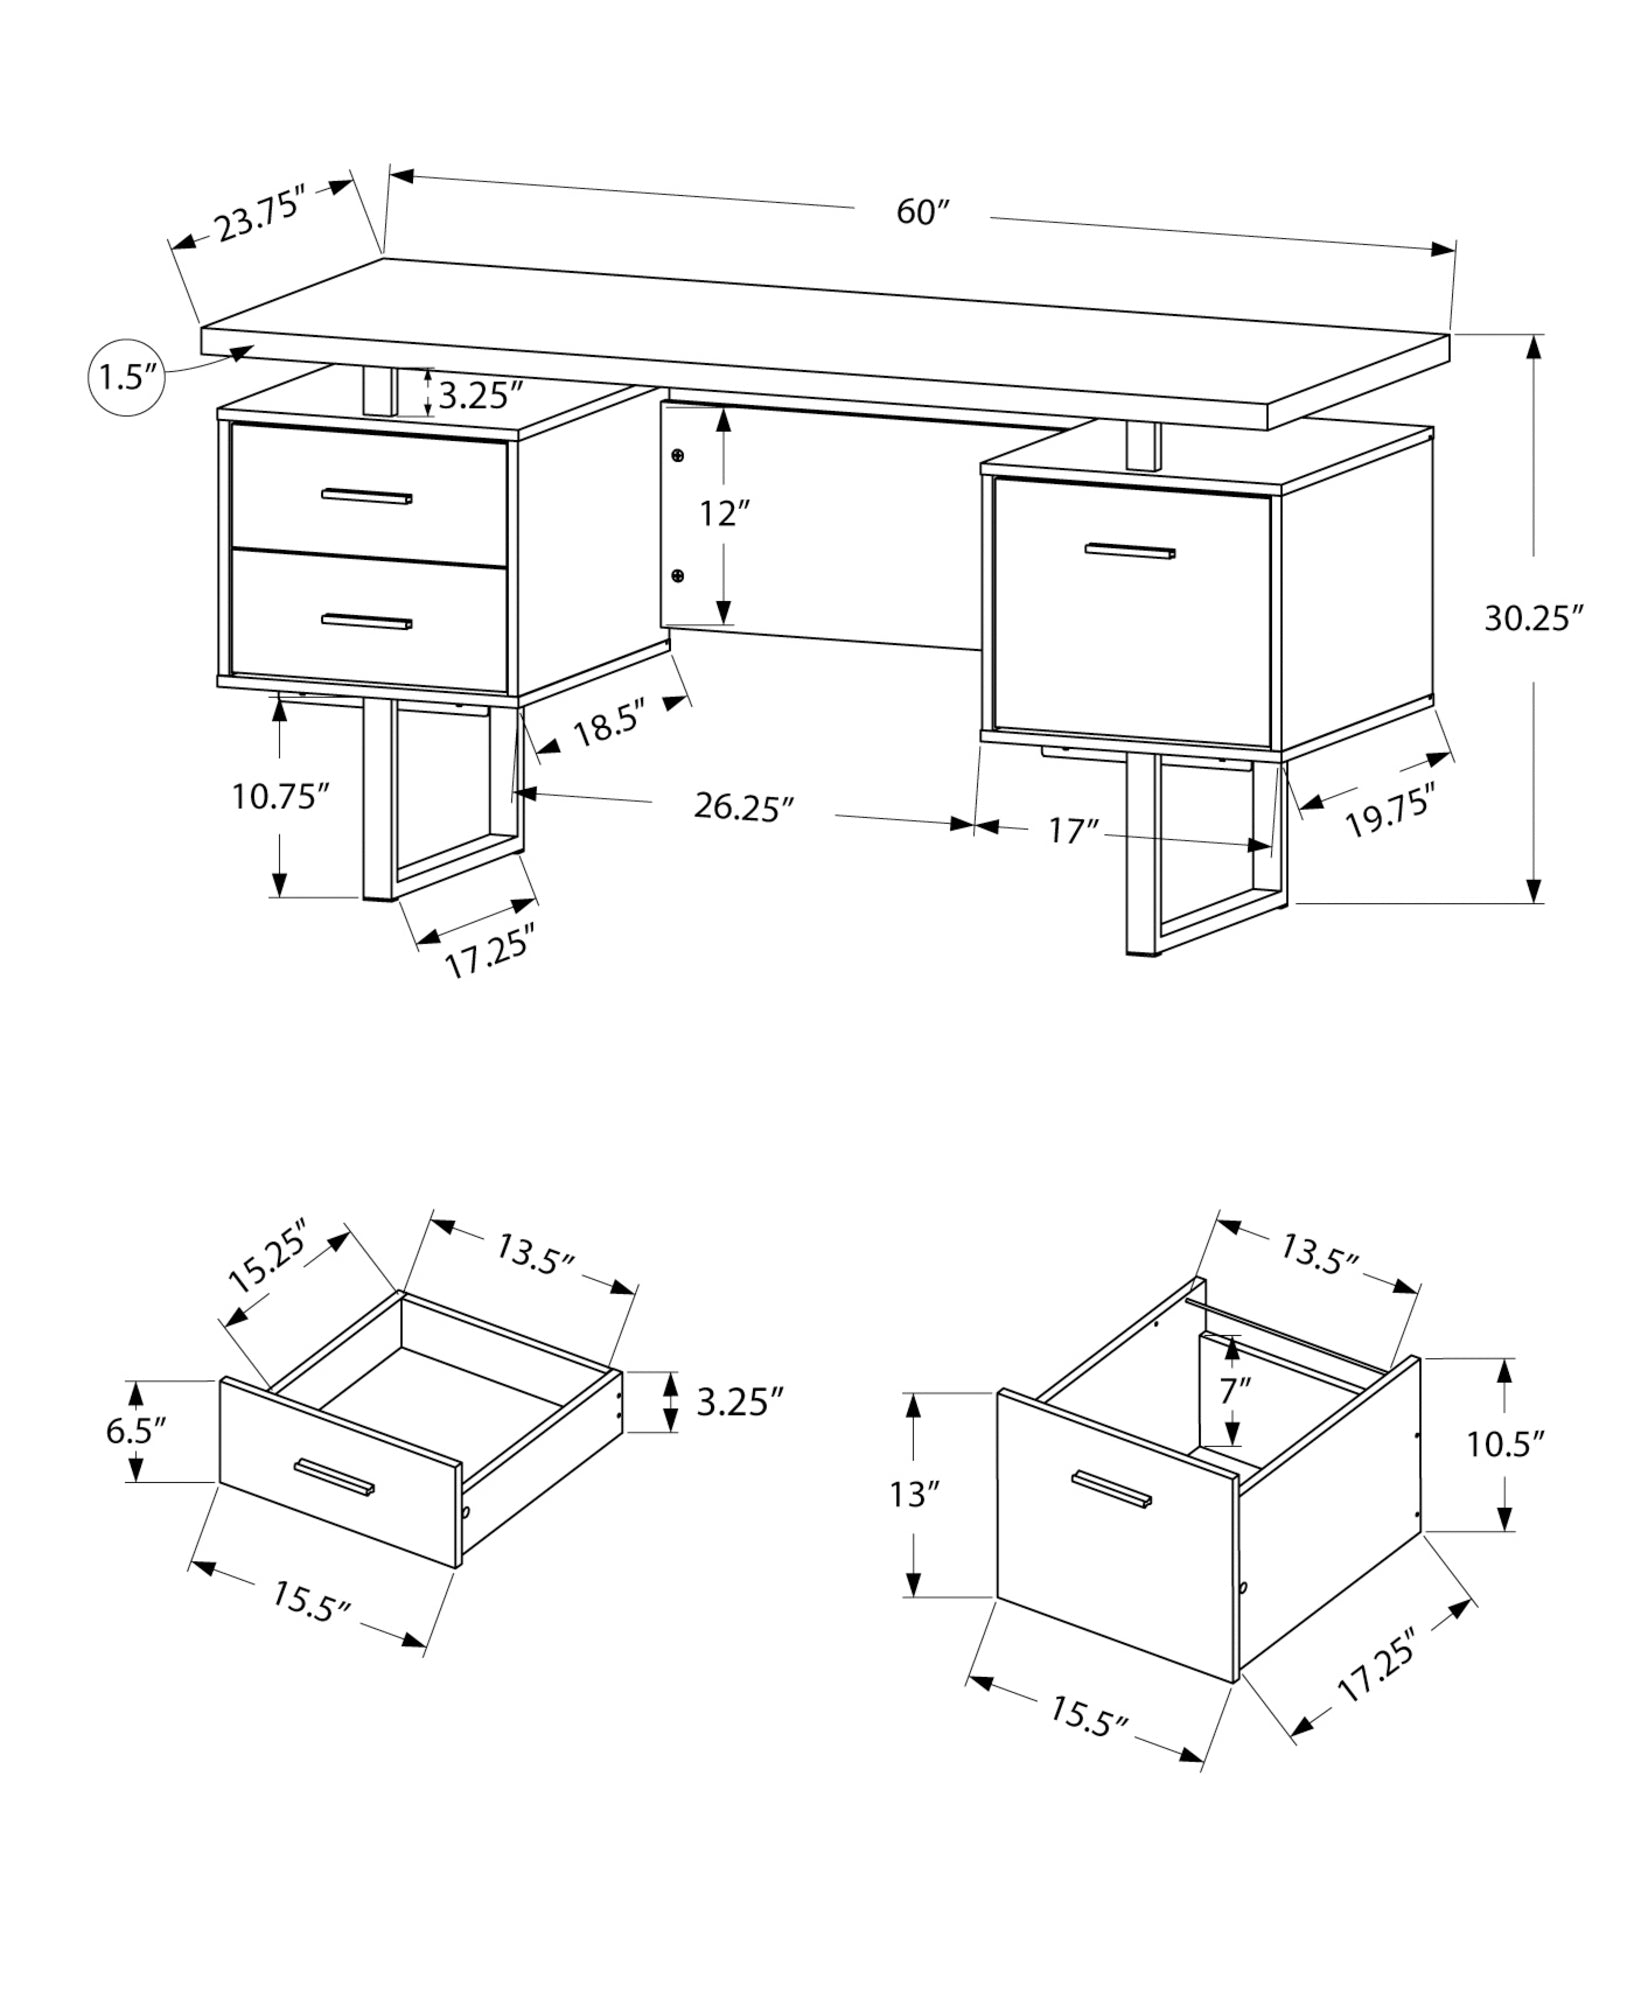 MN-457634    Computer Desk, Home Office, Laptop, Left, Right Set-Up, Storage Drawers, 60"L, Metal, Laminate, Black, Silver, Contemporary, Modern